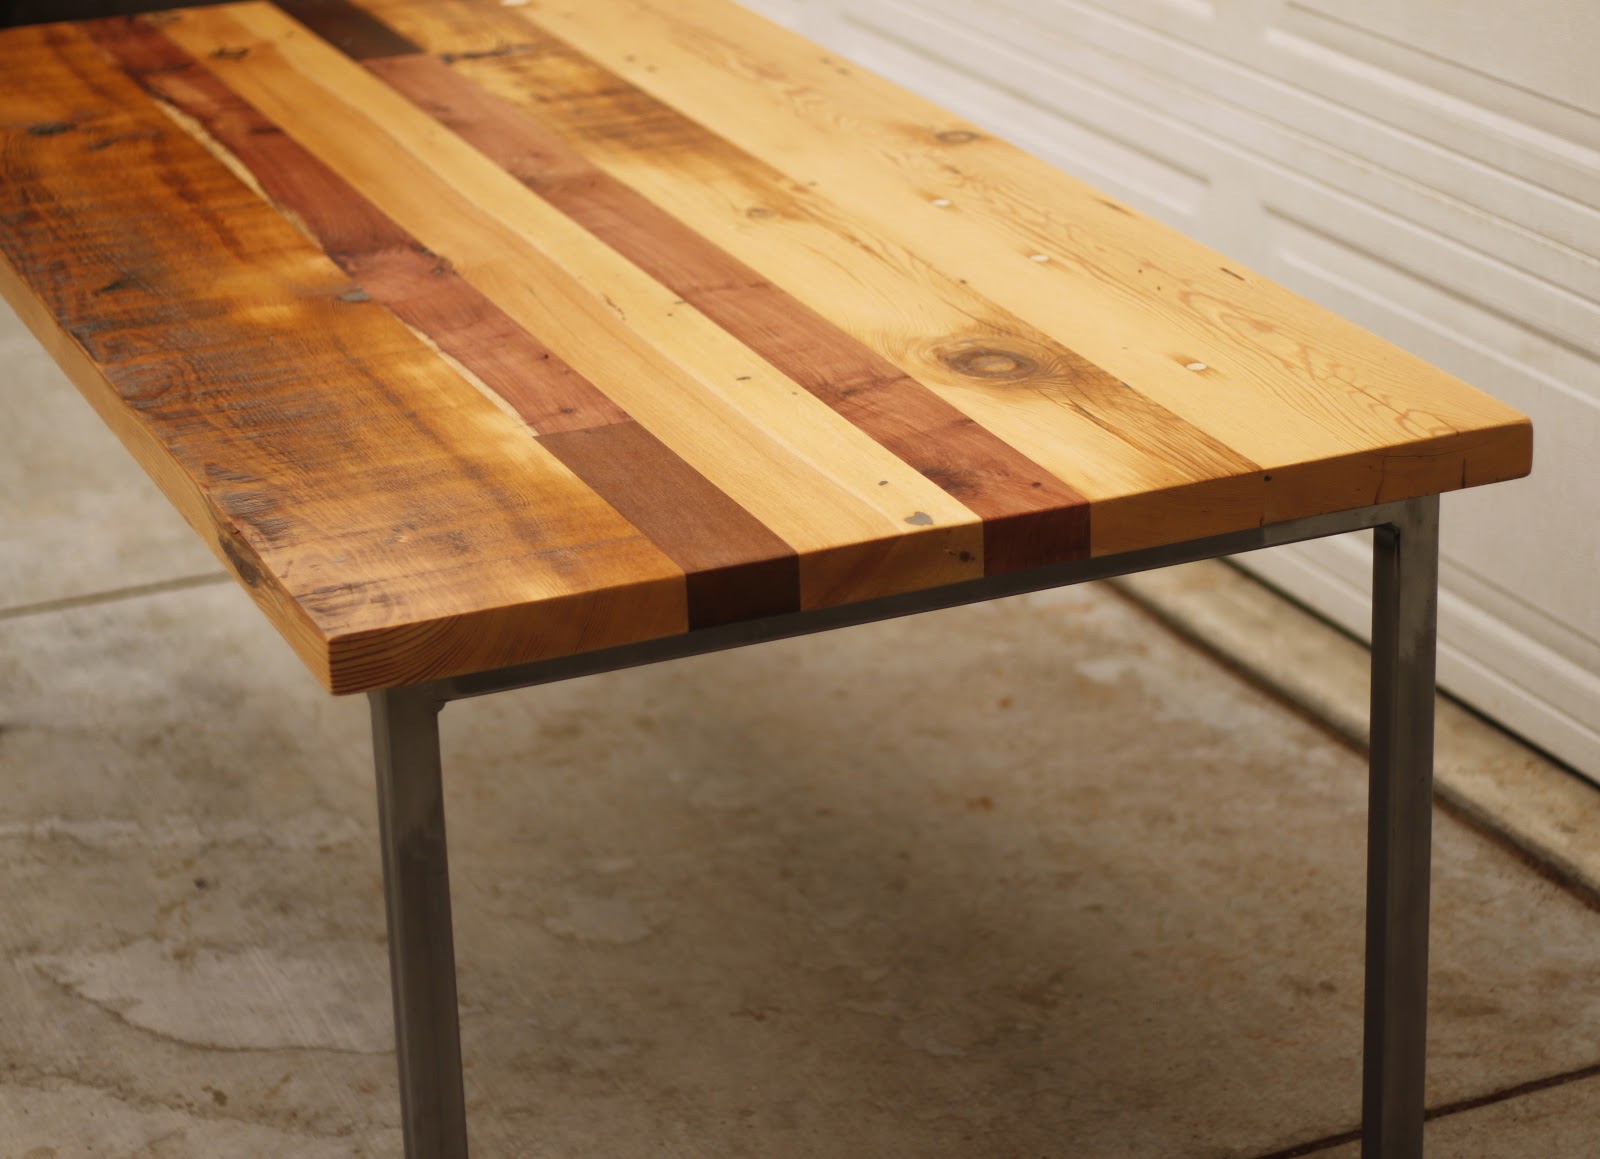 Arbor Exchange | Reclaimed Wood Furniture: Patchwork Table ...